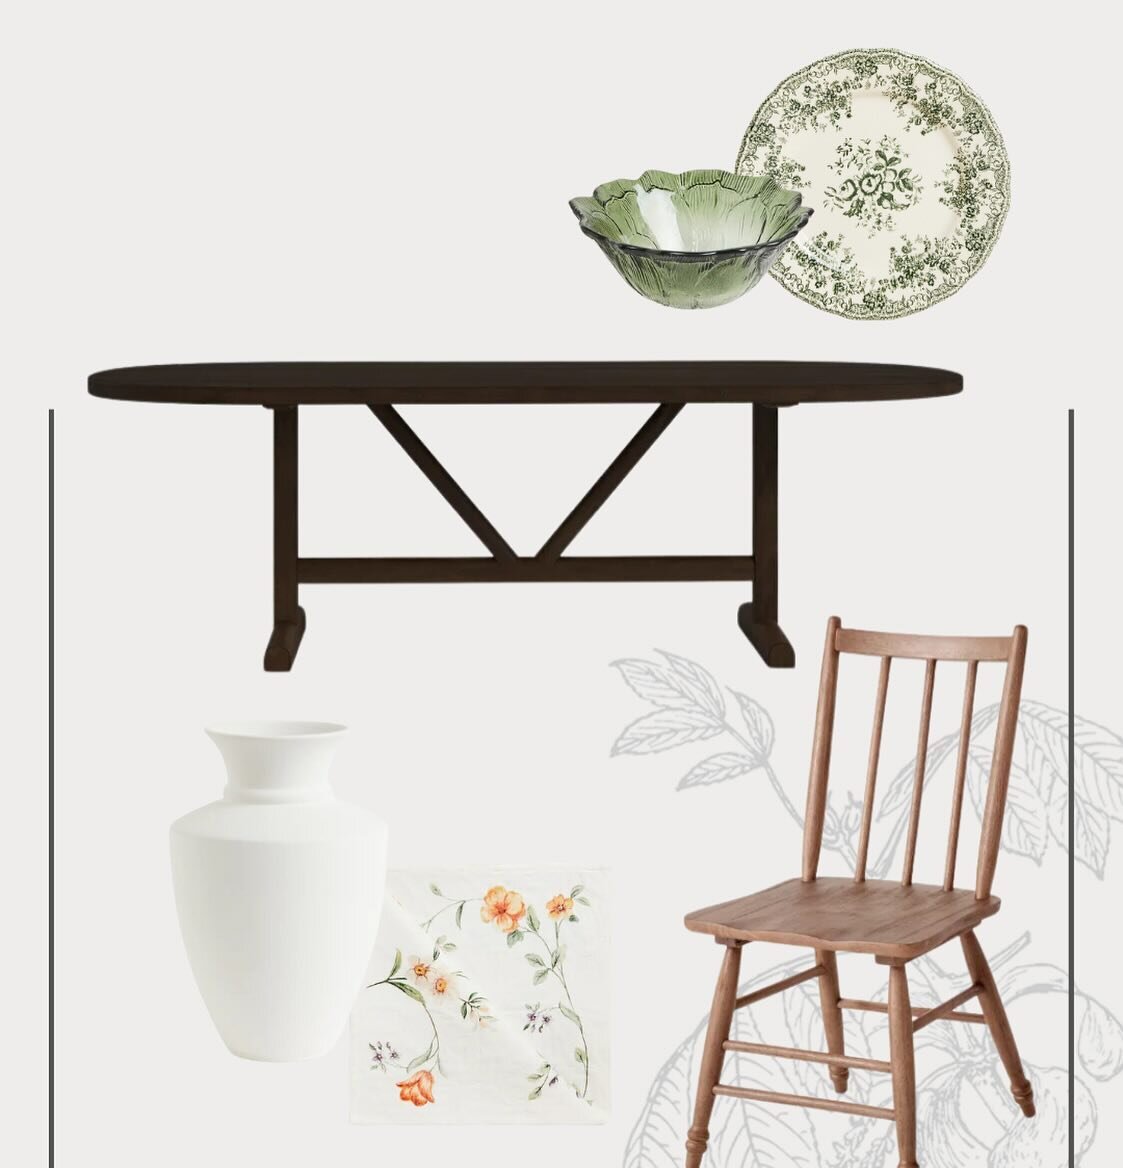 Sharing dining room styling ideas today both based around this solid wood @wayfair table! Weigh in on stories today 🤗